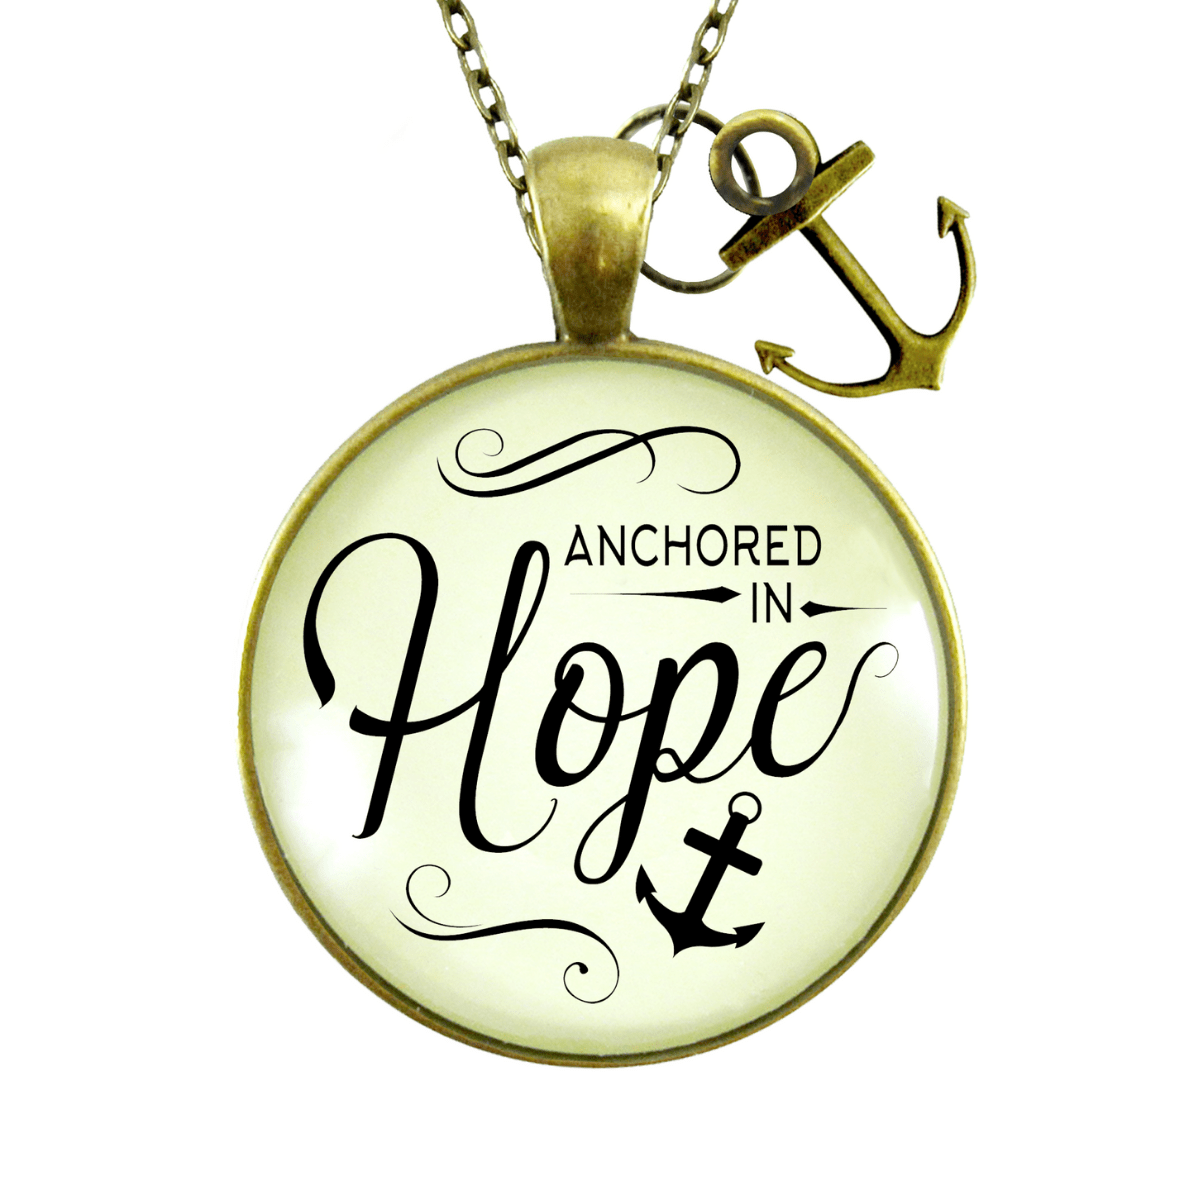 Gutsy Goodness Anchored in Hope Necklace Nautical Theme Faith Words Determination Charm Jewelry - Gutsy Goodness Handmade Jewelry;Anchored In Hope - Gutsy Goodness Handmade Jewelry Gifts